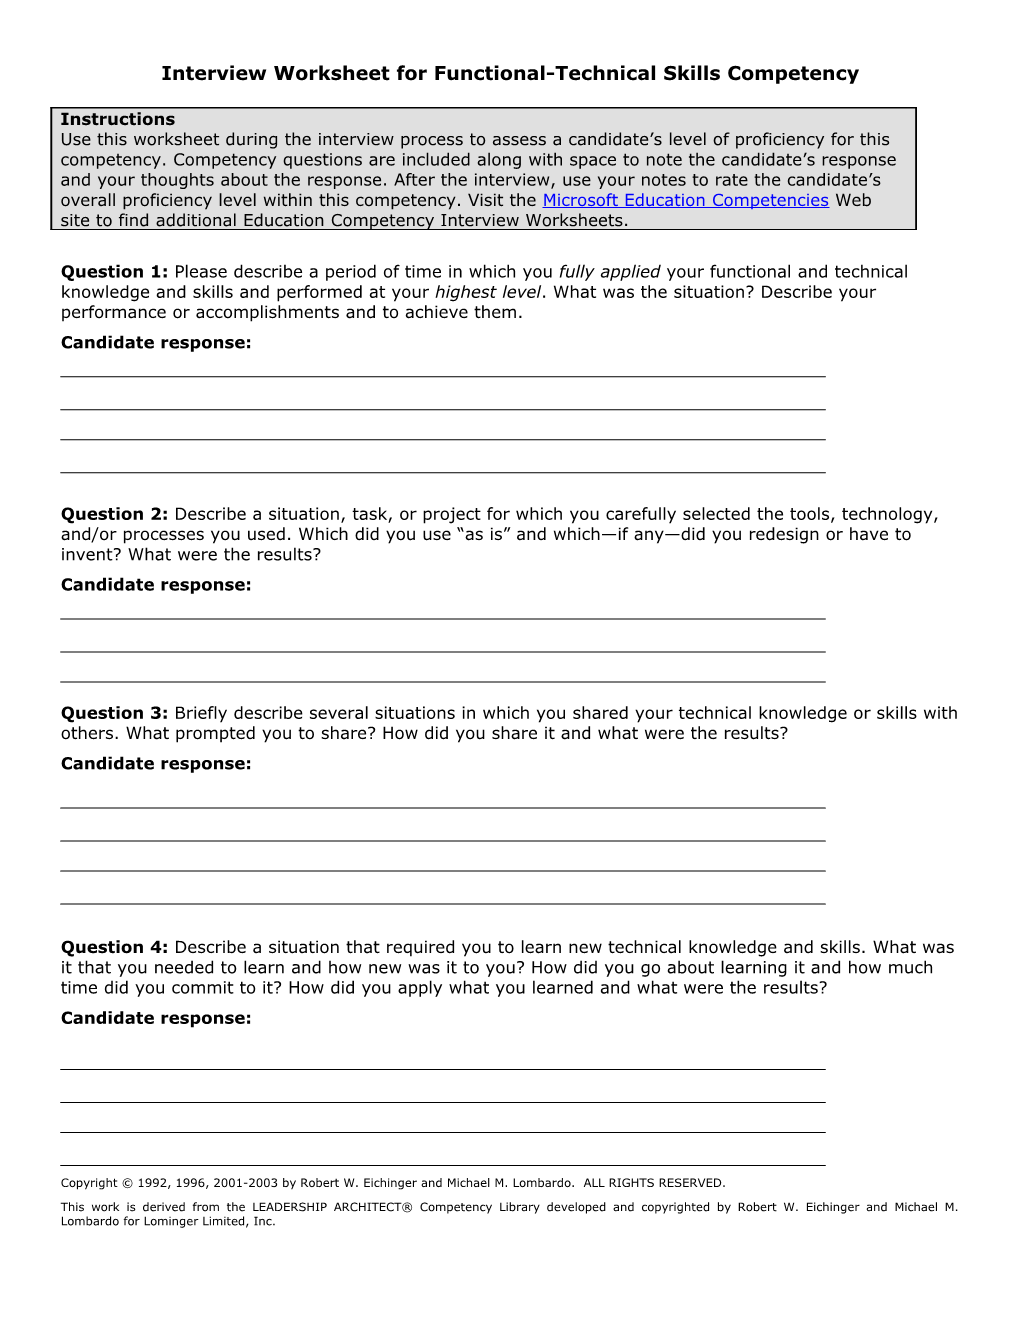 Interview Worksheet for Functional-Technical Skills Competency